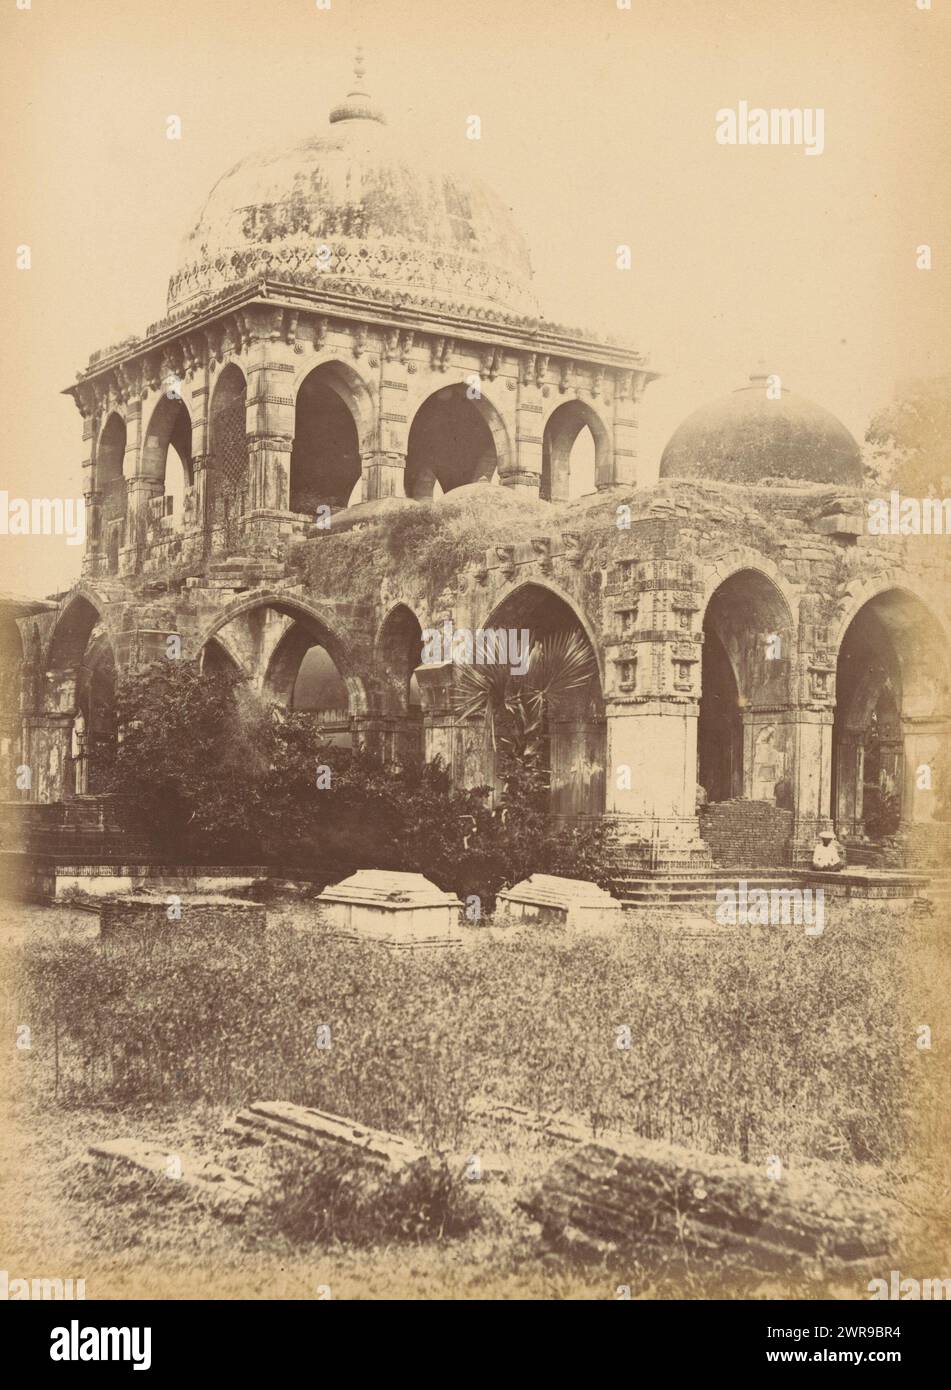 Tomb of Kootub-i-Alum in Batwa near Ahmedabad, Butwa,- The Tomb of Kootub-i-Alum (title on object), Thomas Biggs, Ahmedabad, c. 1856 - in or before 1866, photographic support, albumen print, height 202 mm × width 148 mm, photograph Stock Photo